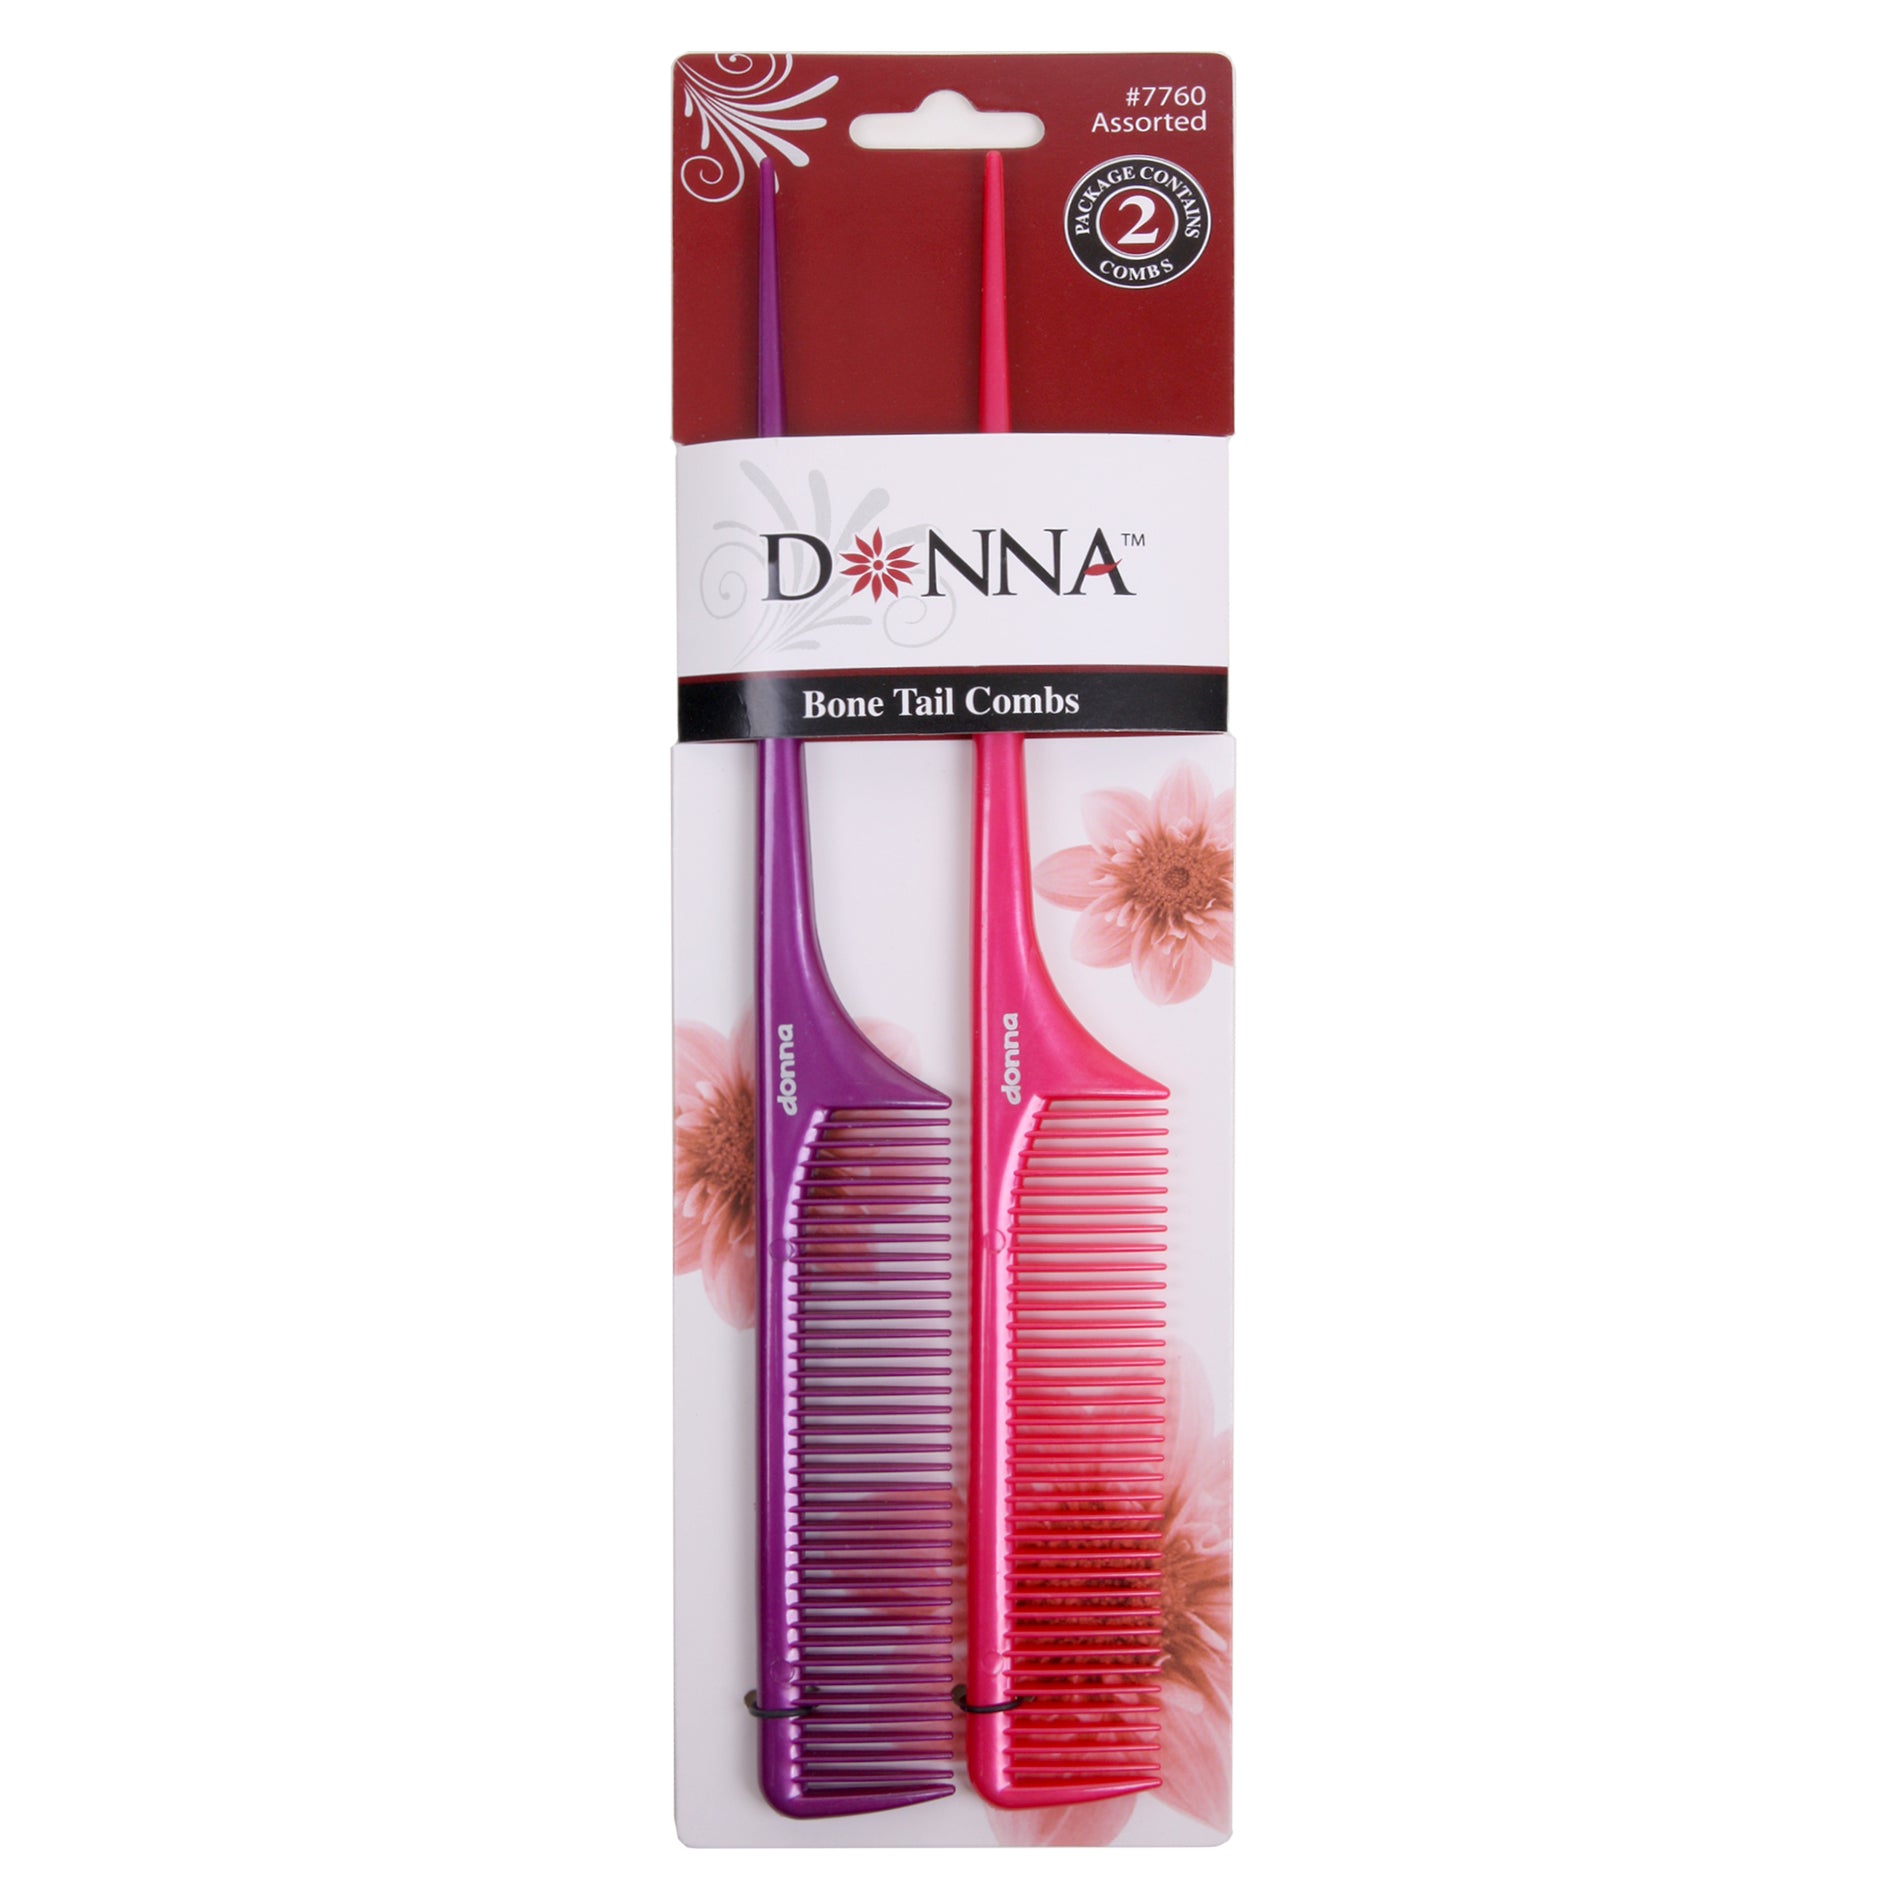 4th Ave Market: Donna Handle Combs 2 Piece